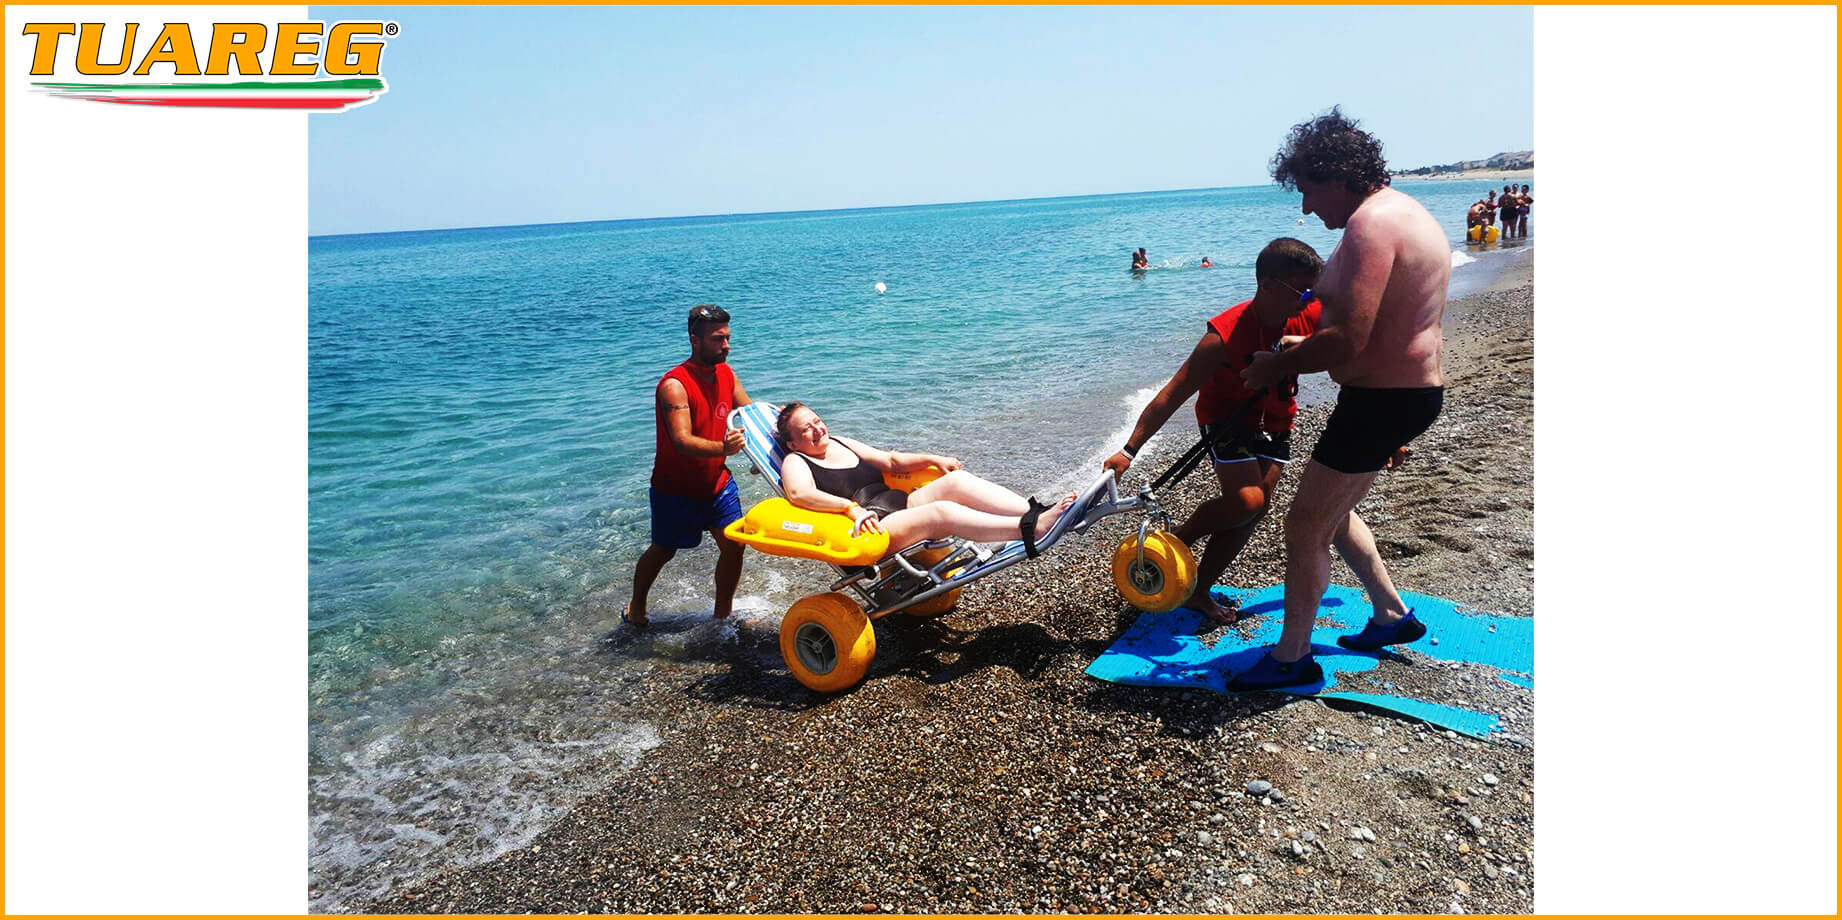 Float Chair by beach for disabled - Tuareg Access - Product/Accessory for Beach Accessibility